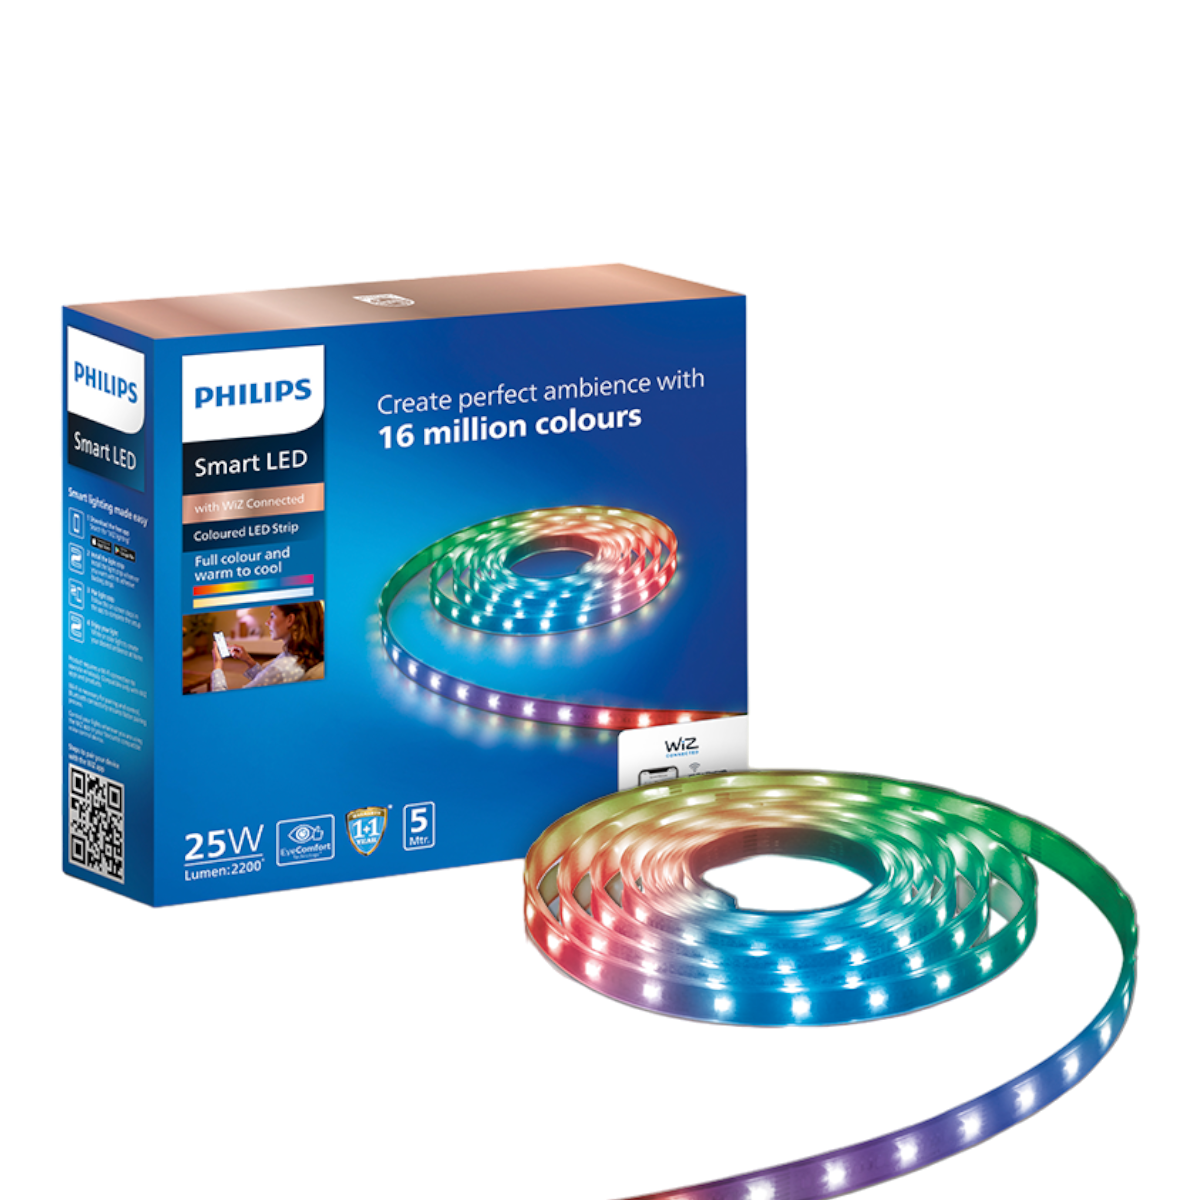 Philips Smart WiFi LED Strip light (Wiz Connected)